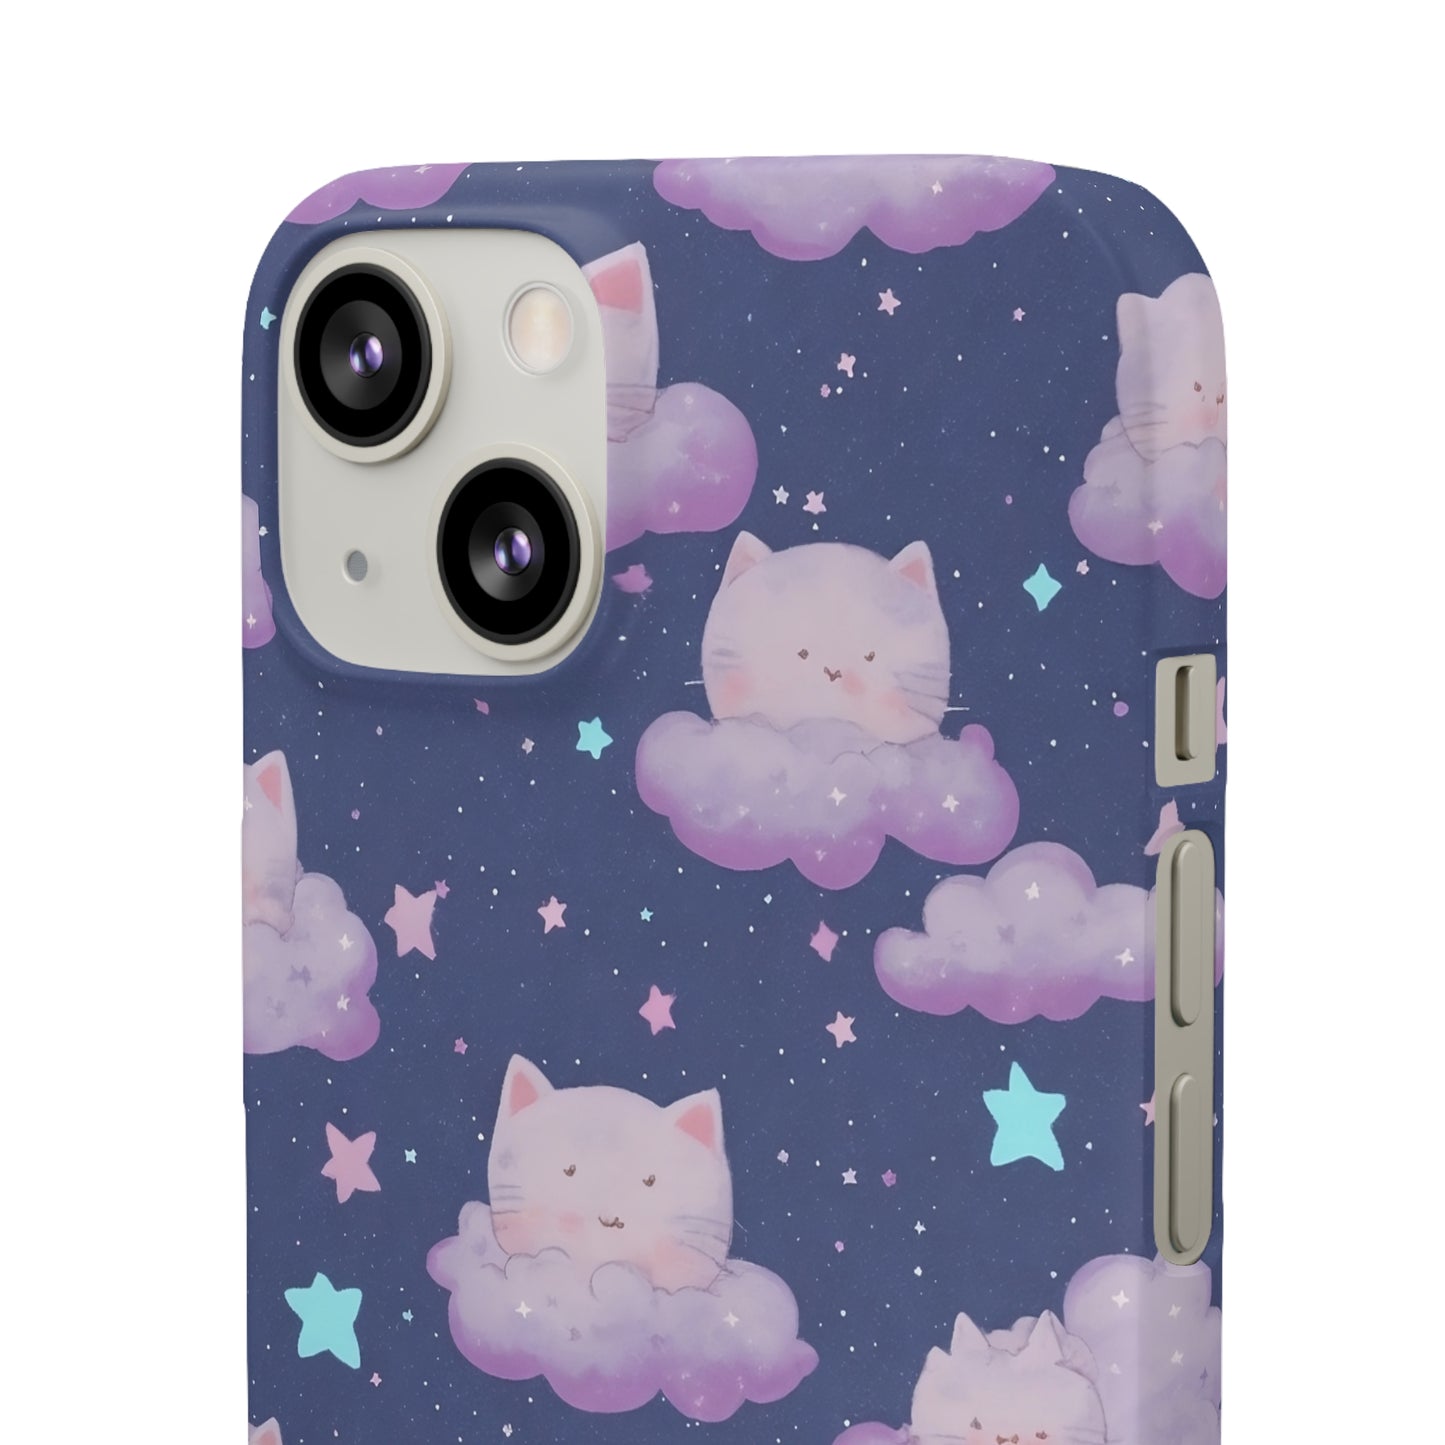 "Purrfect Paradise Sky" iPhone Snap Cases